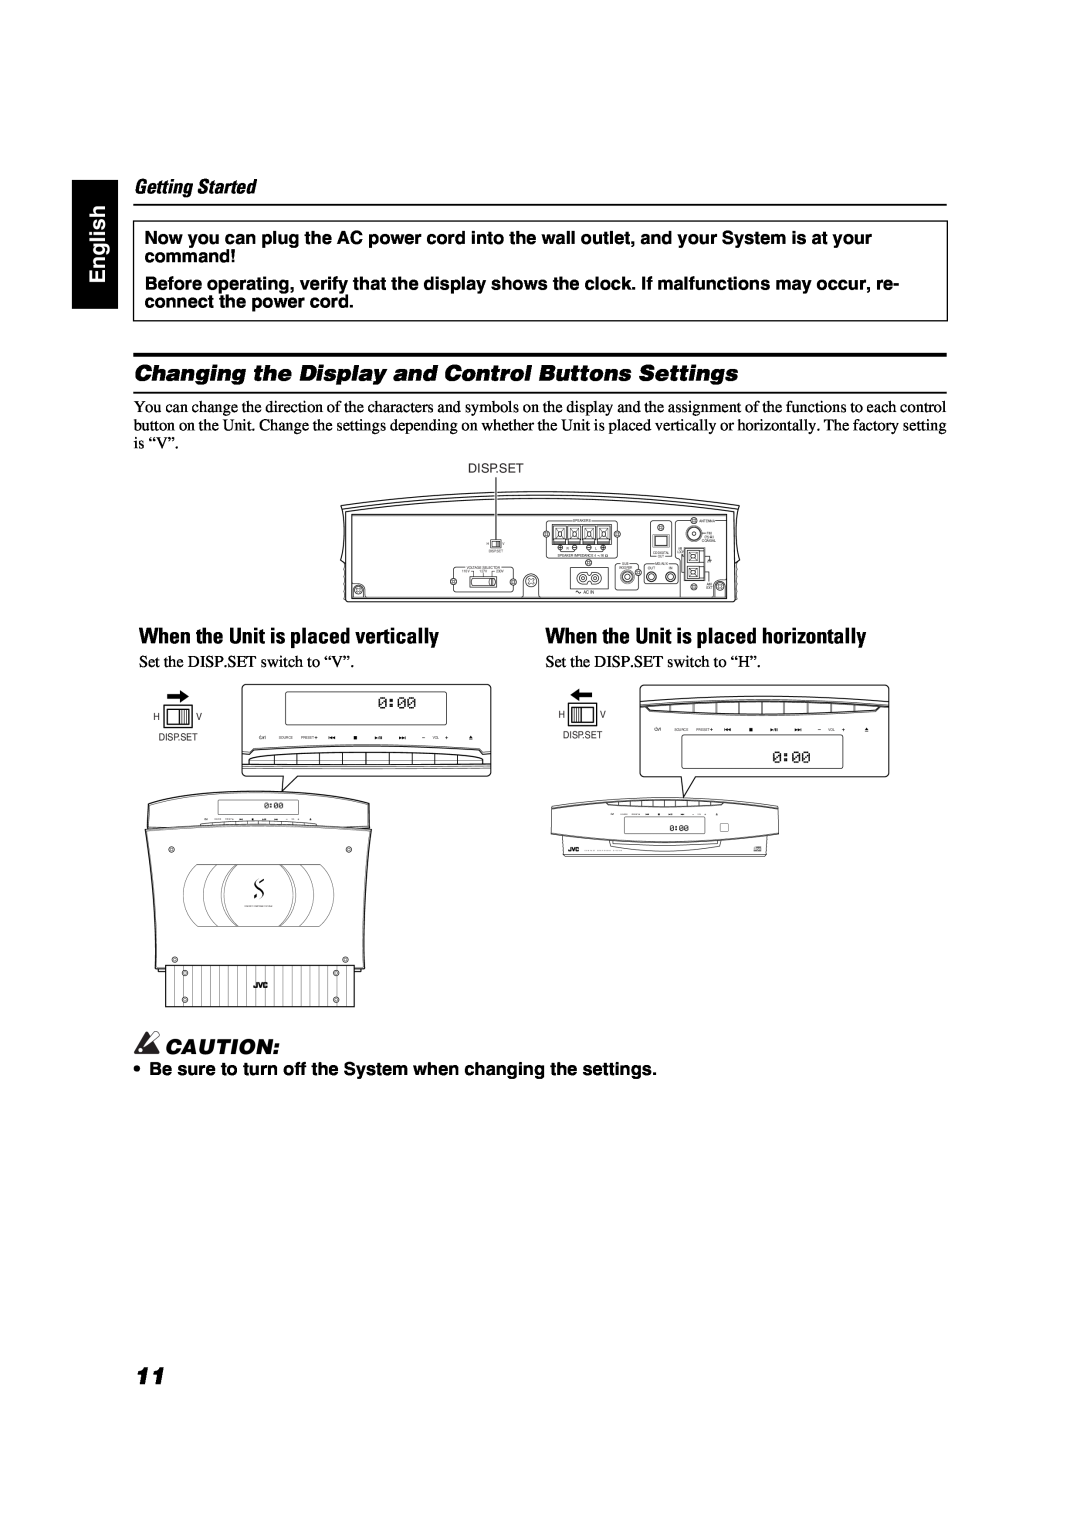 JVC VS-DT2000 manual English, Changing the Display and Control Buttons Settings, When the Unit is placed vertically 